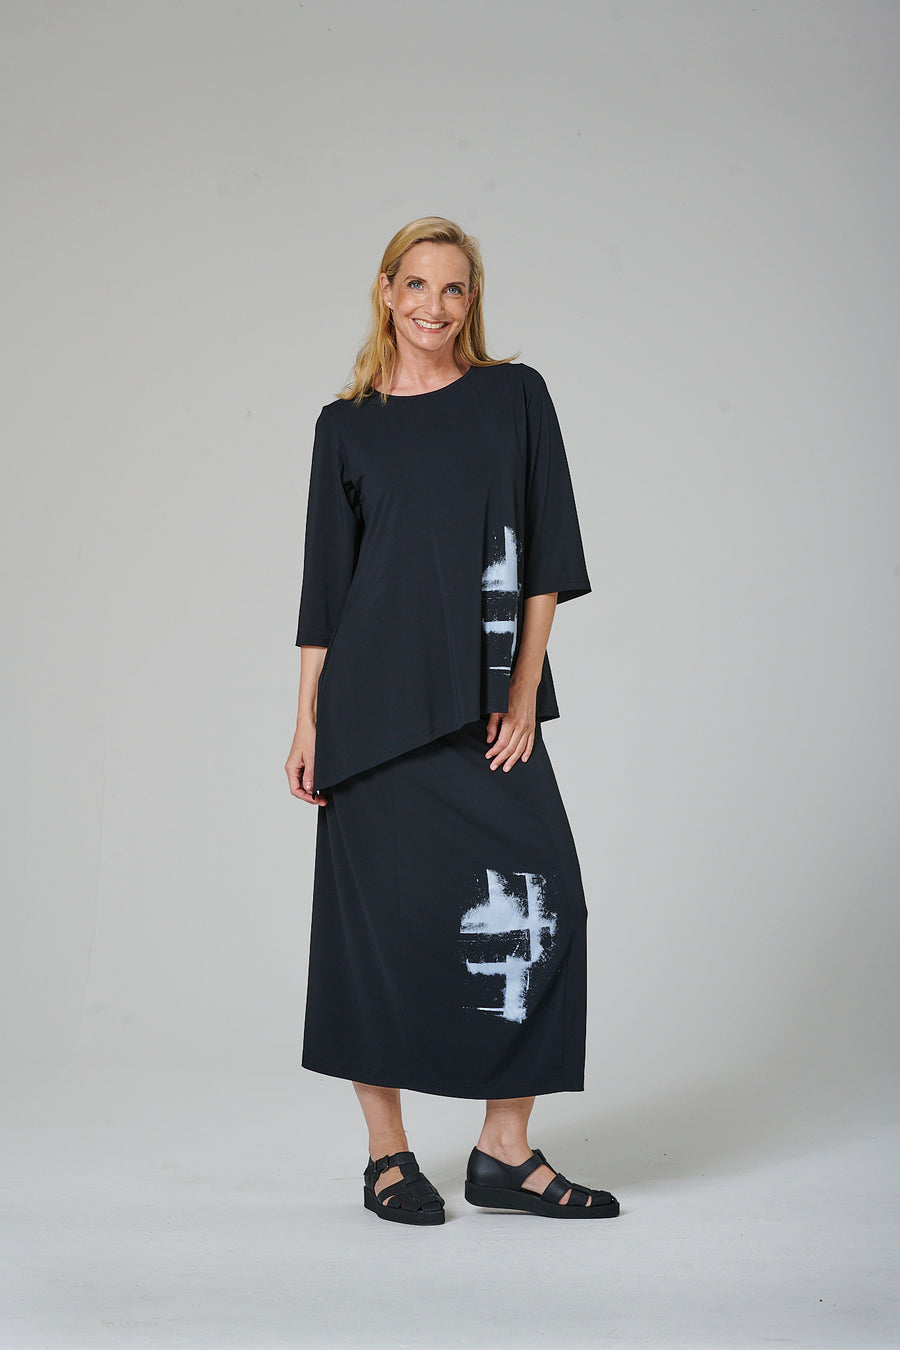 Skirt made of acetate jersey blended fabric with elastane (328r1) printed or plain